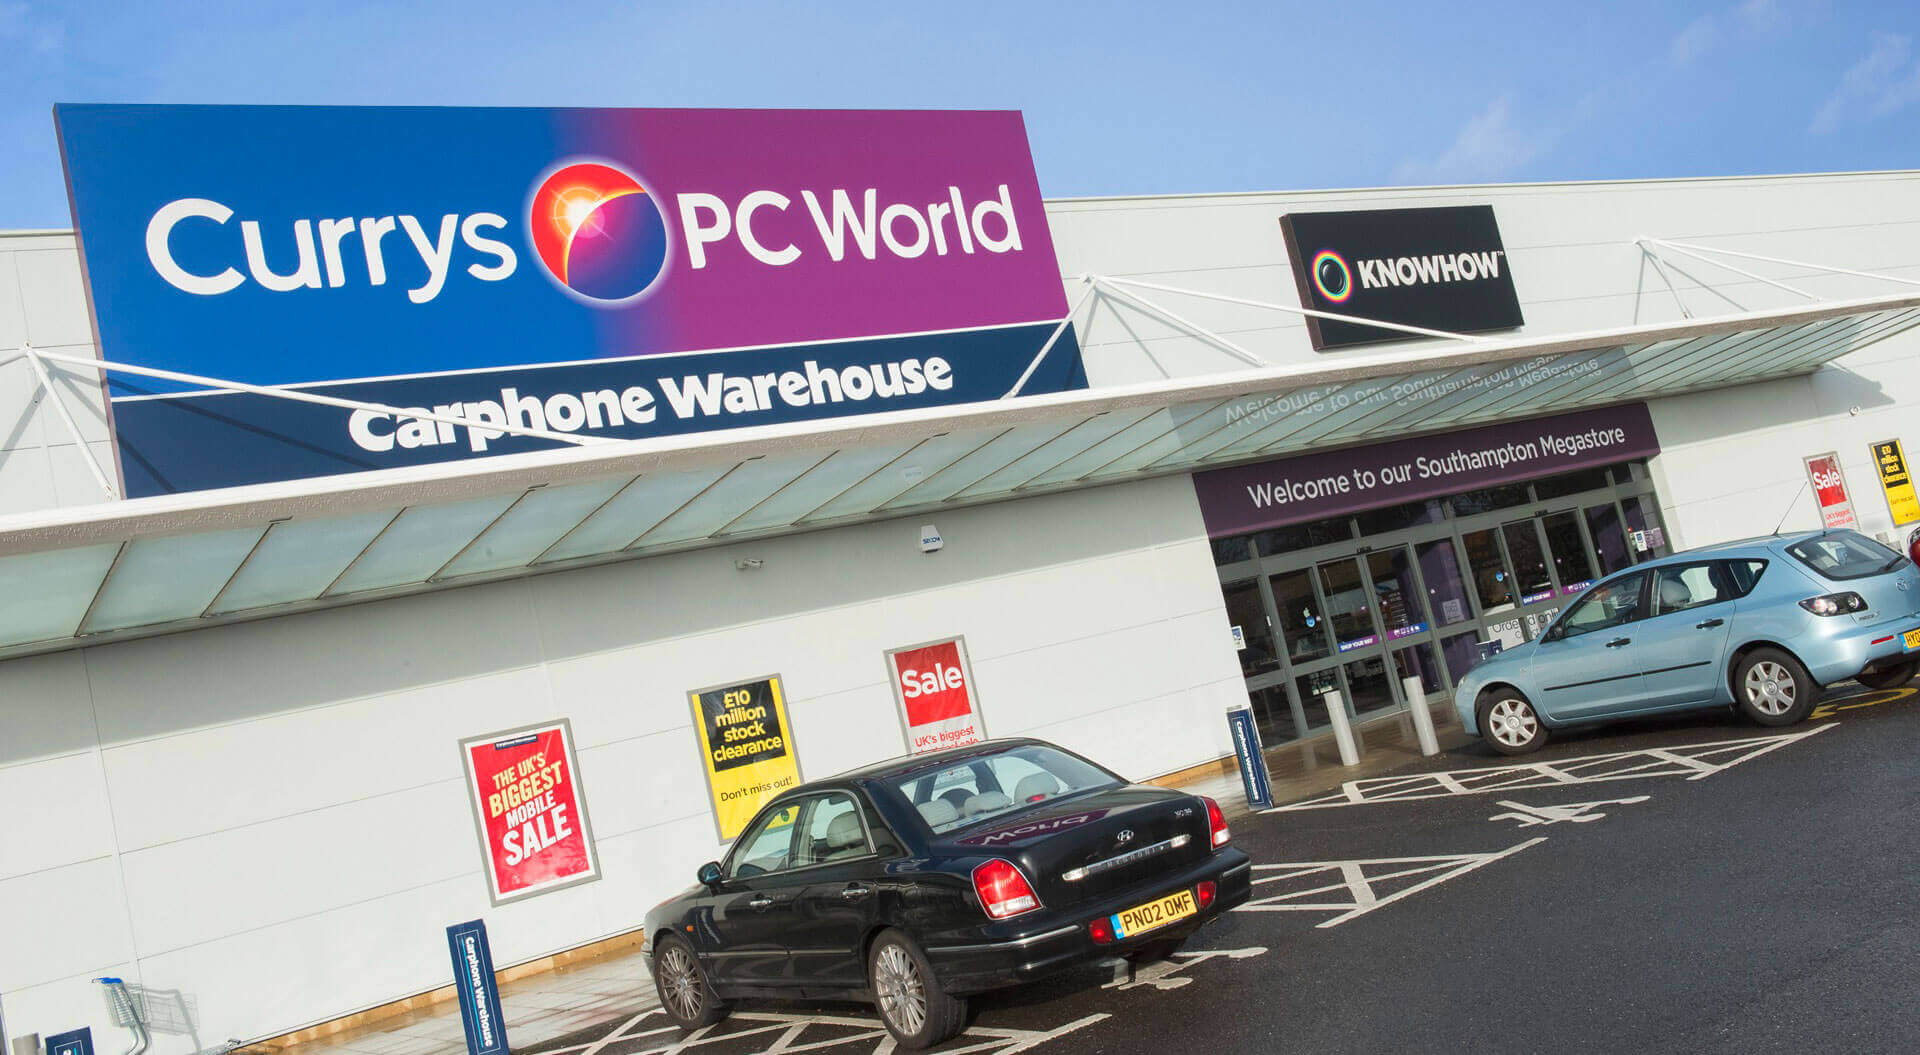 Currys PC World Stores rebrand, interior design and communications for technology out-of-town retail park stores